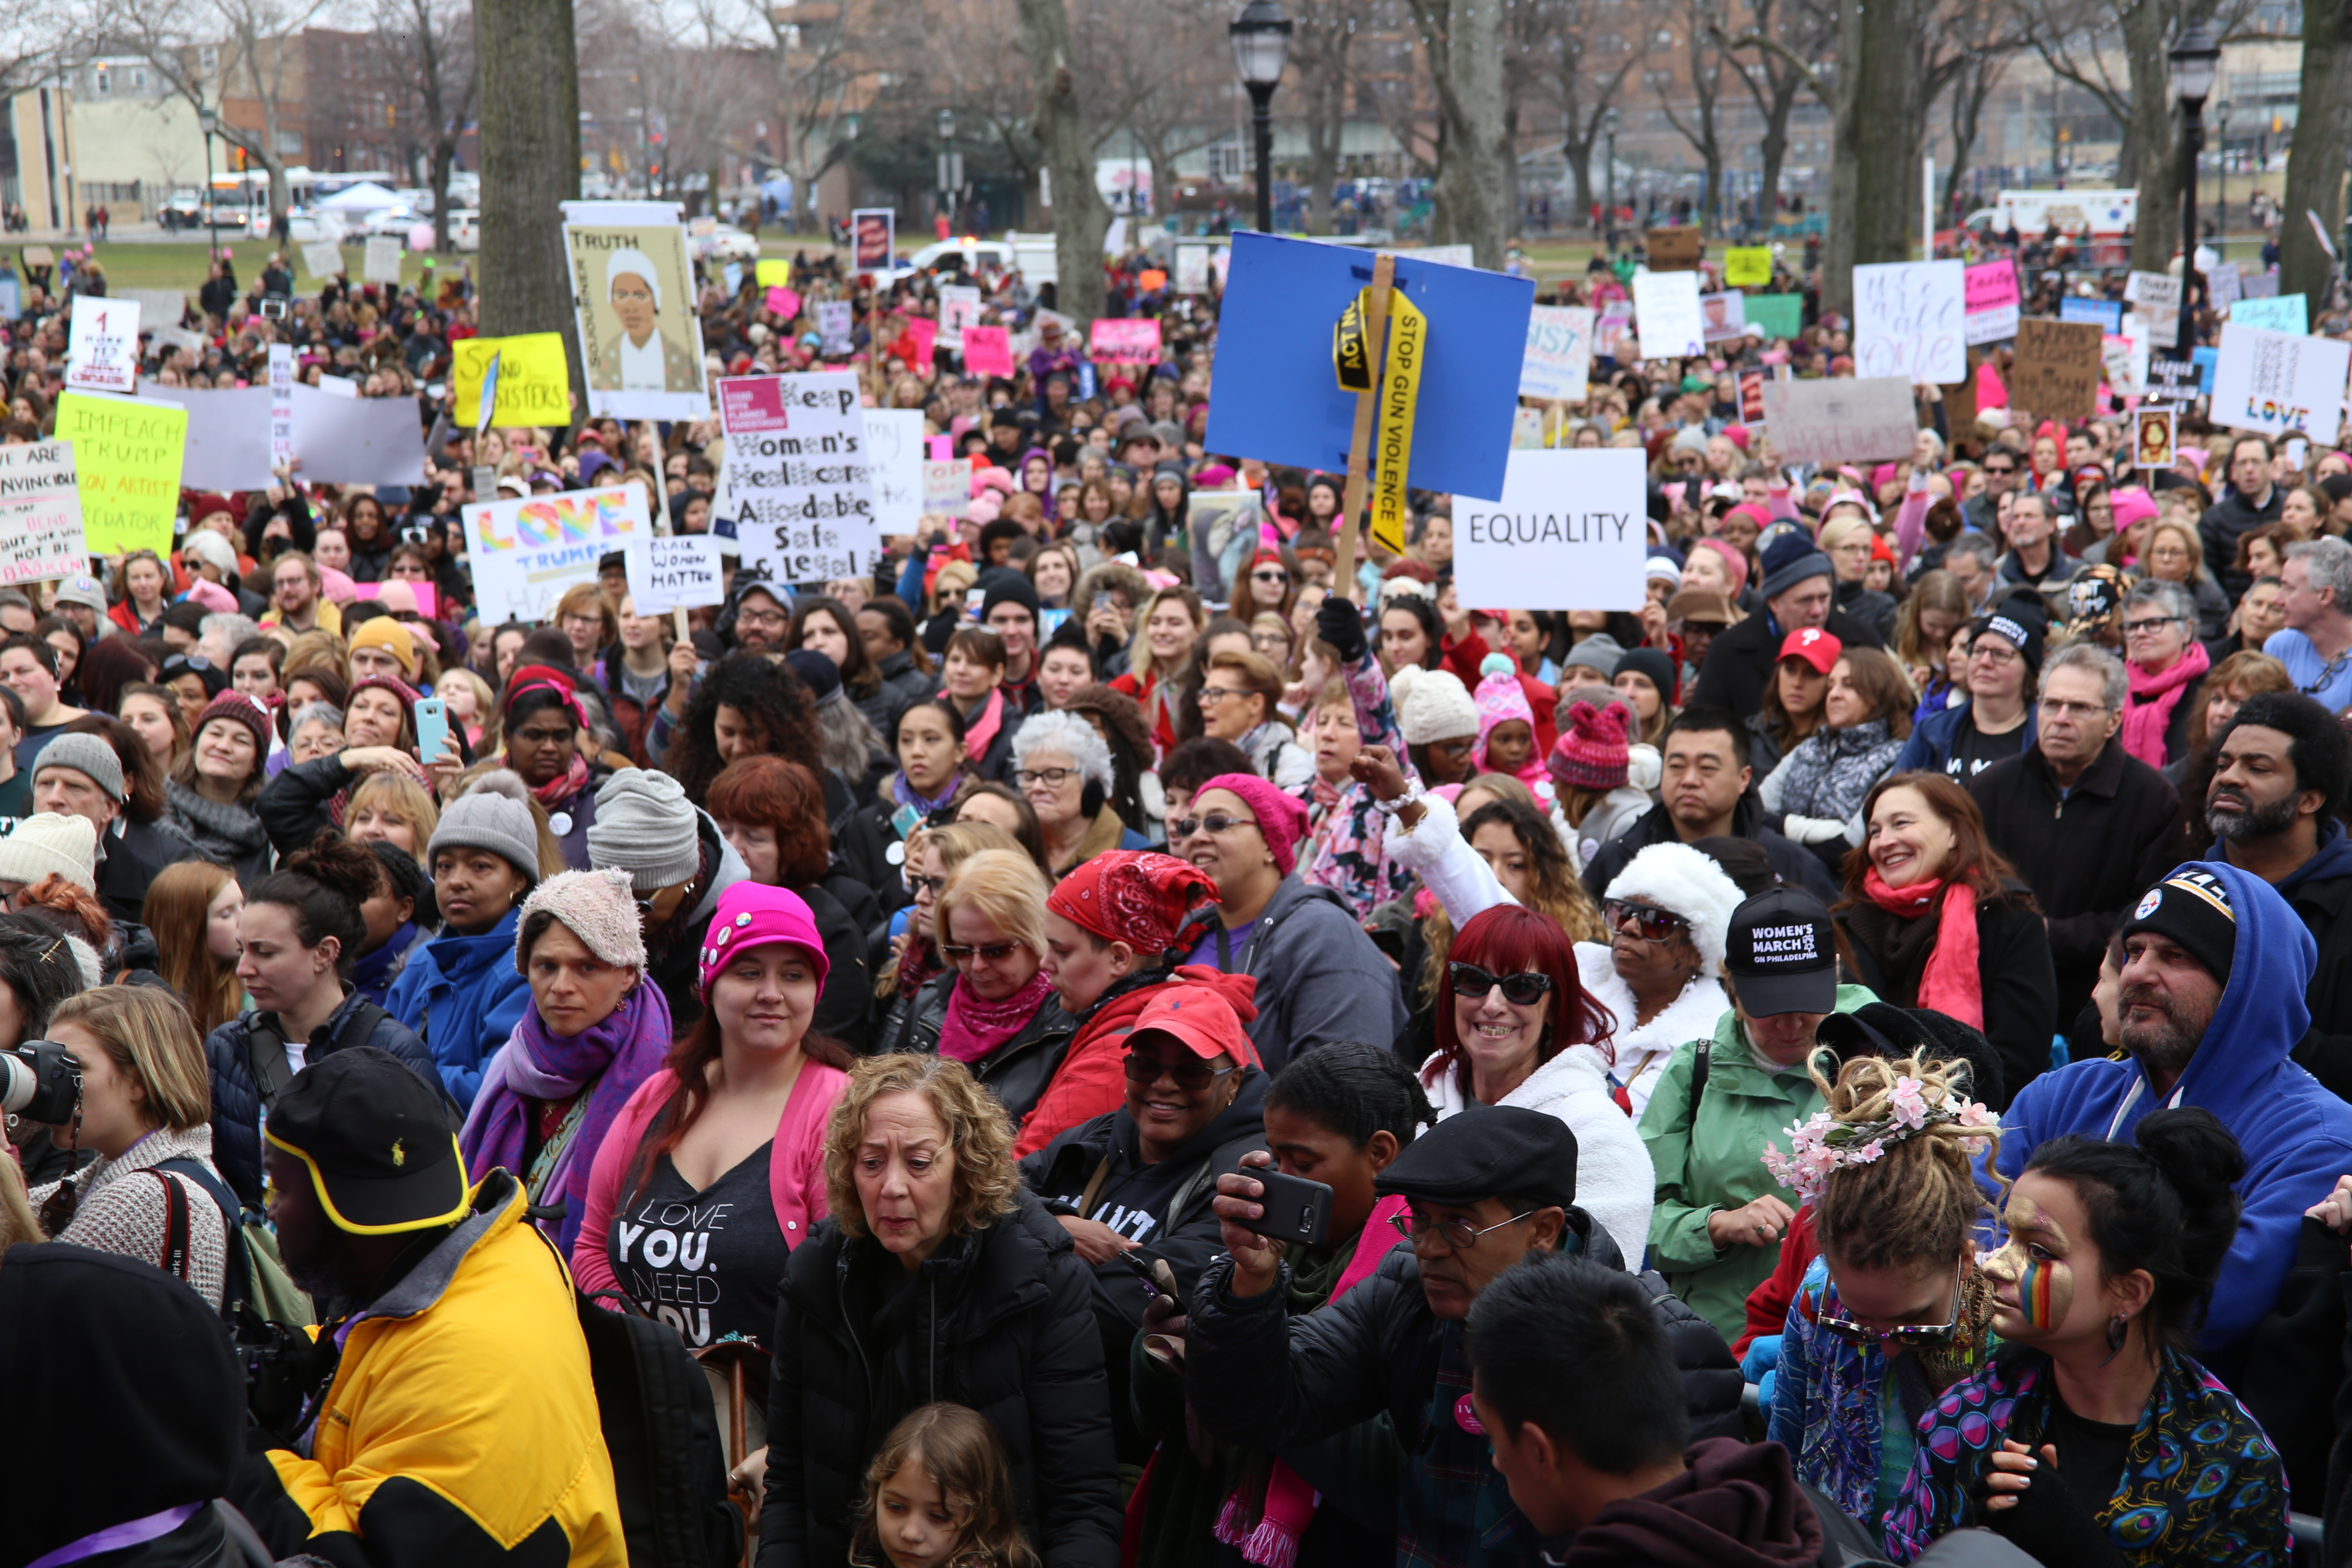 A crowd comprised mostly of women, some in pink scarves and hats, holding signs about equality and feminism. 